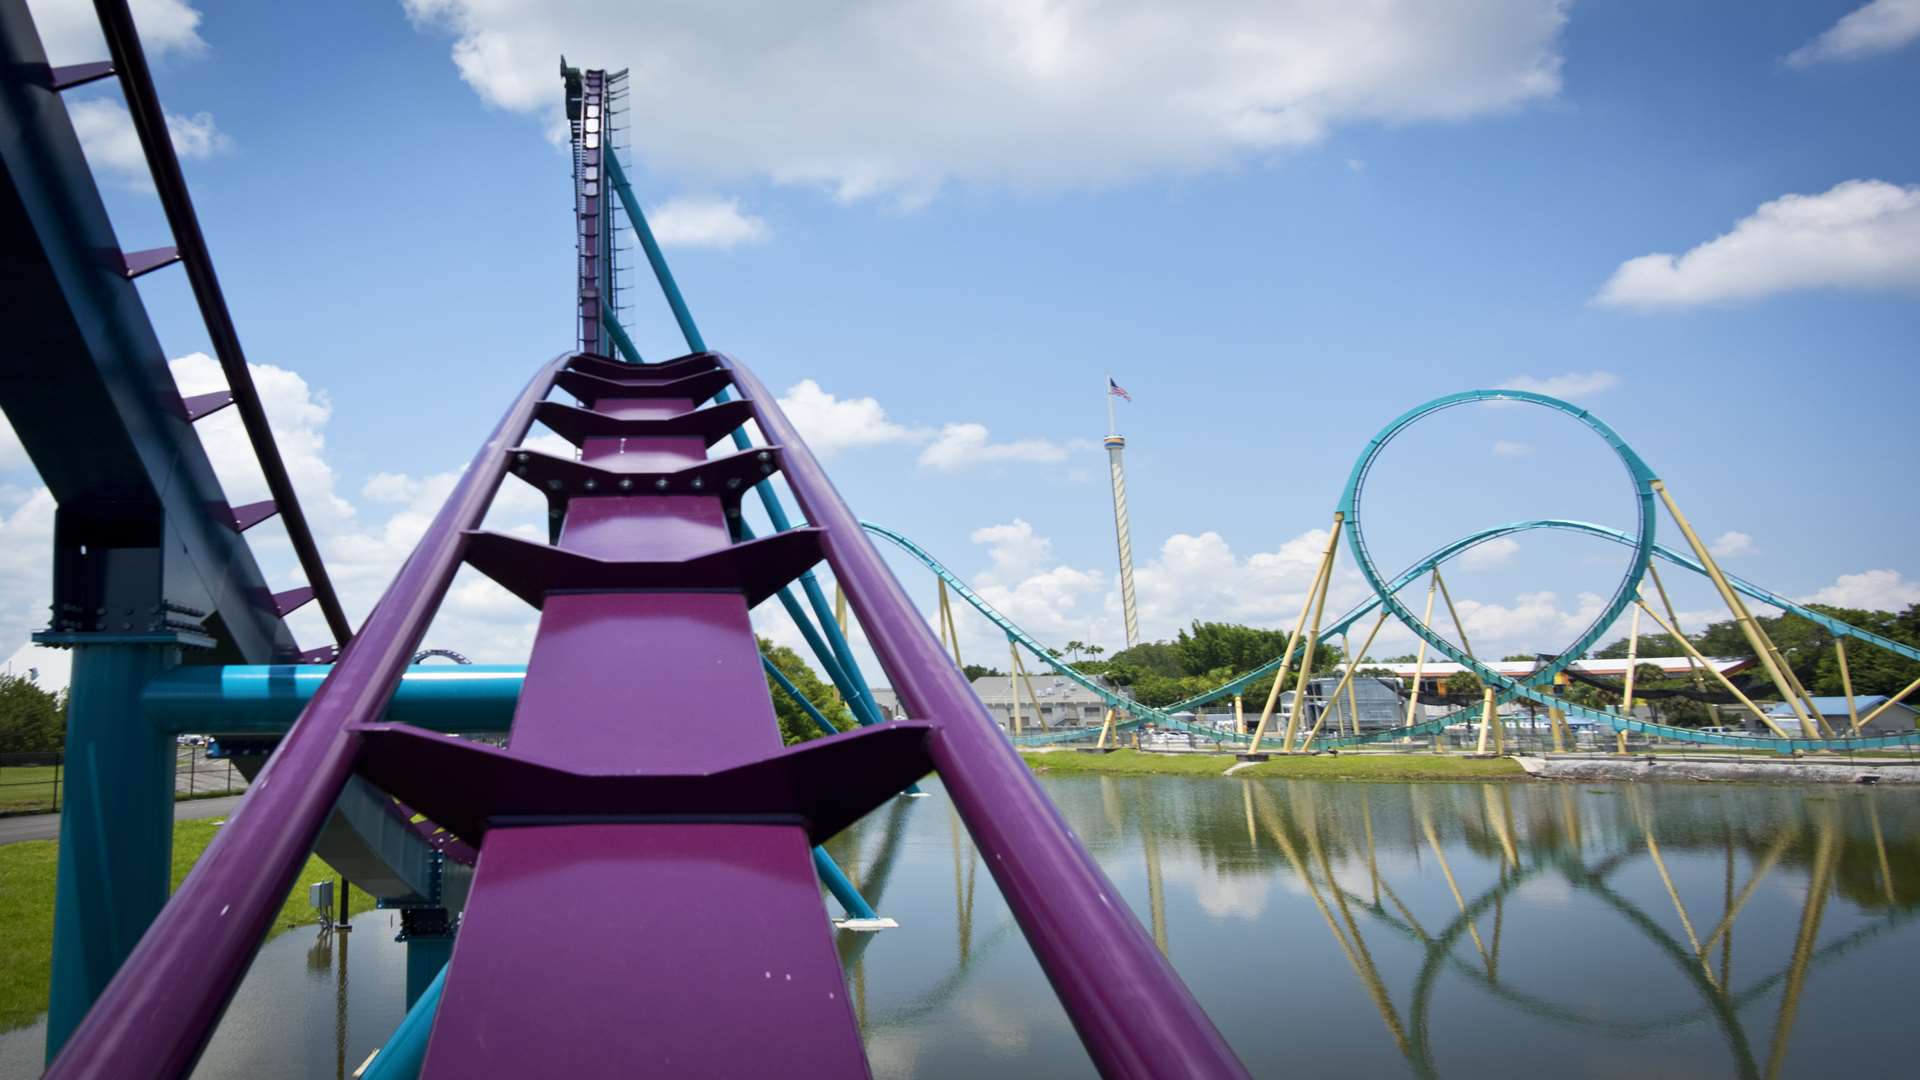 We tried out the rides at SeaWorld, Aquatica and Discovery Cove in Orlando